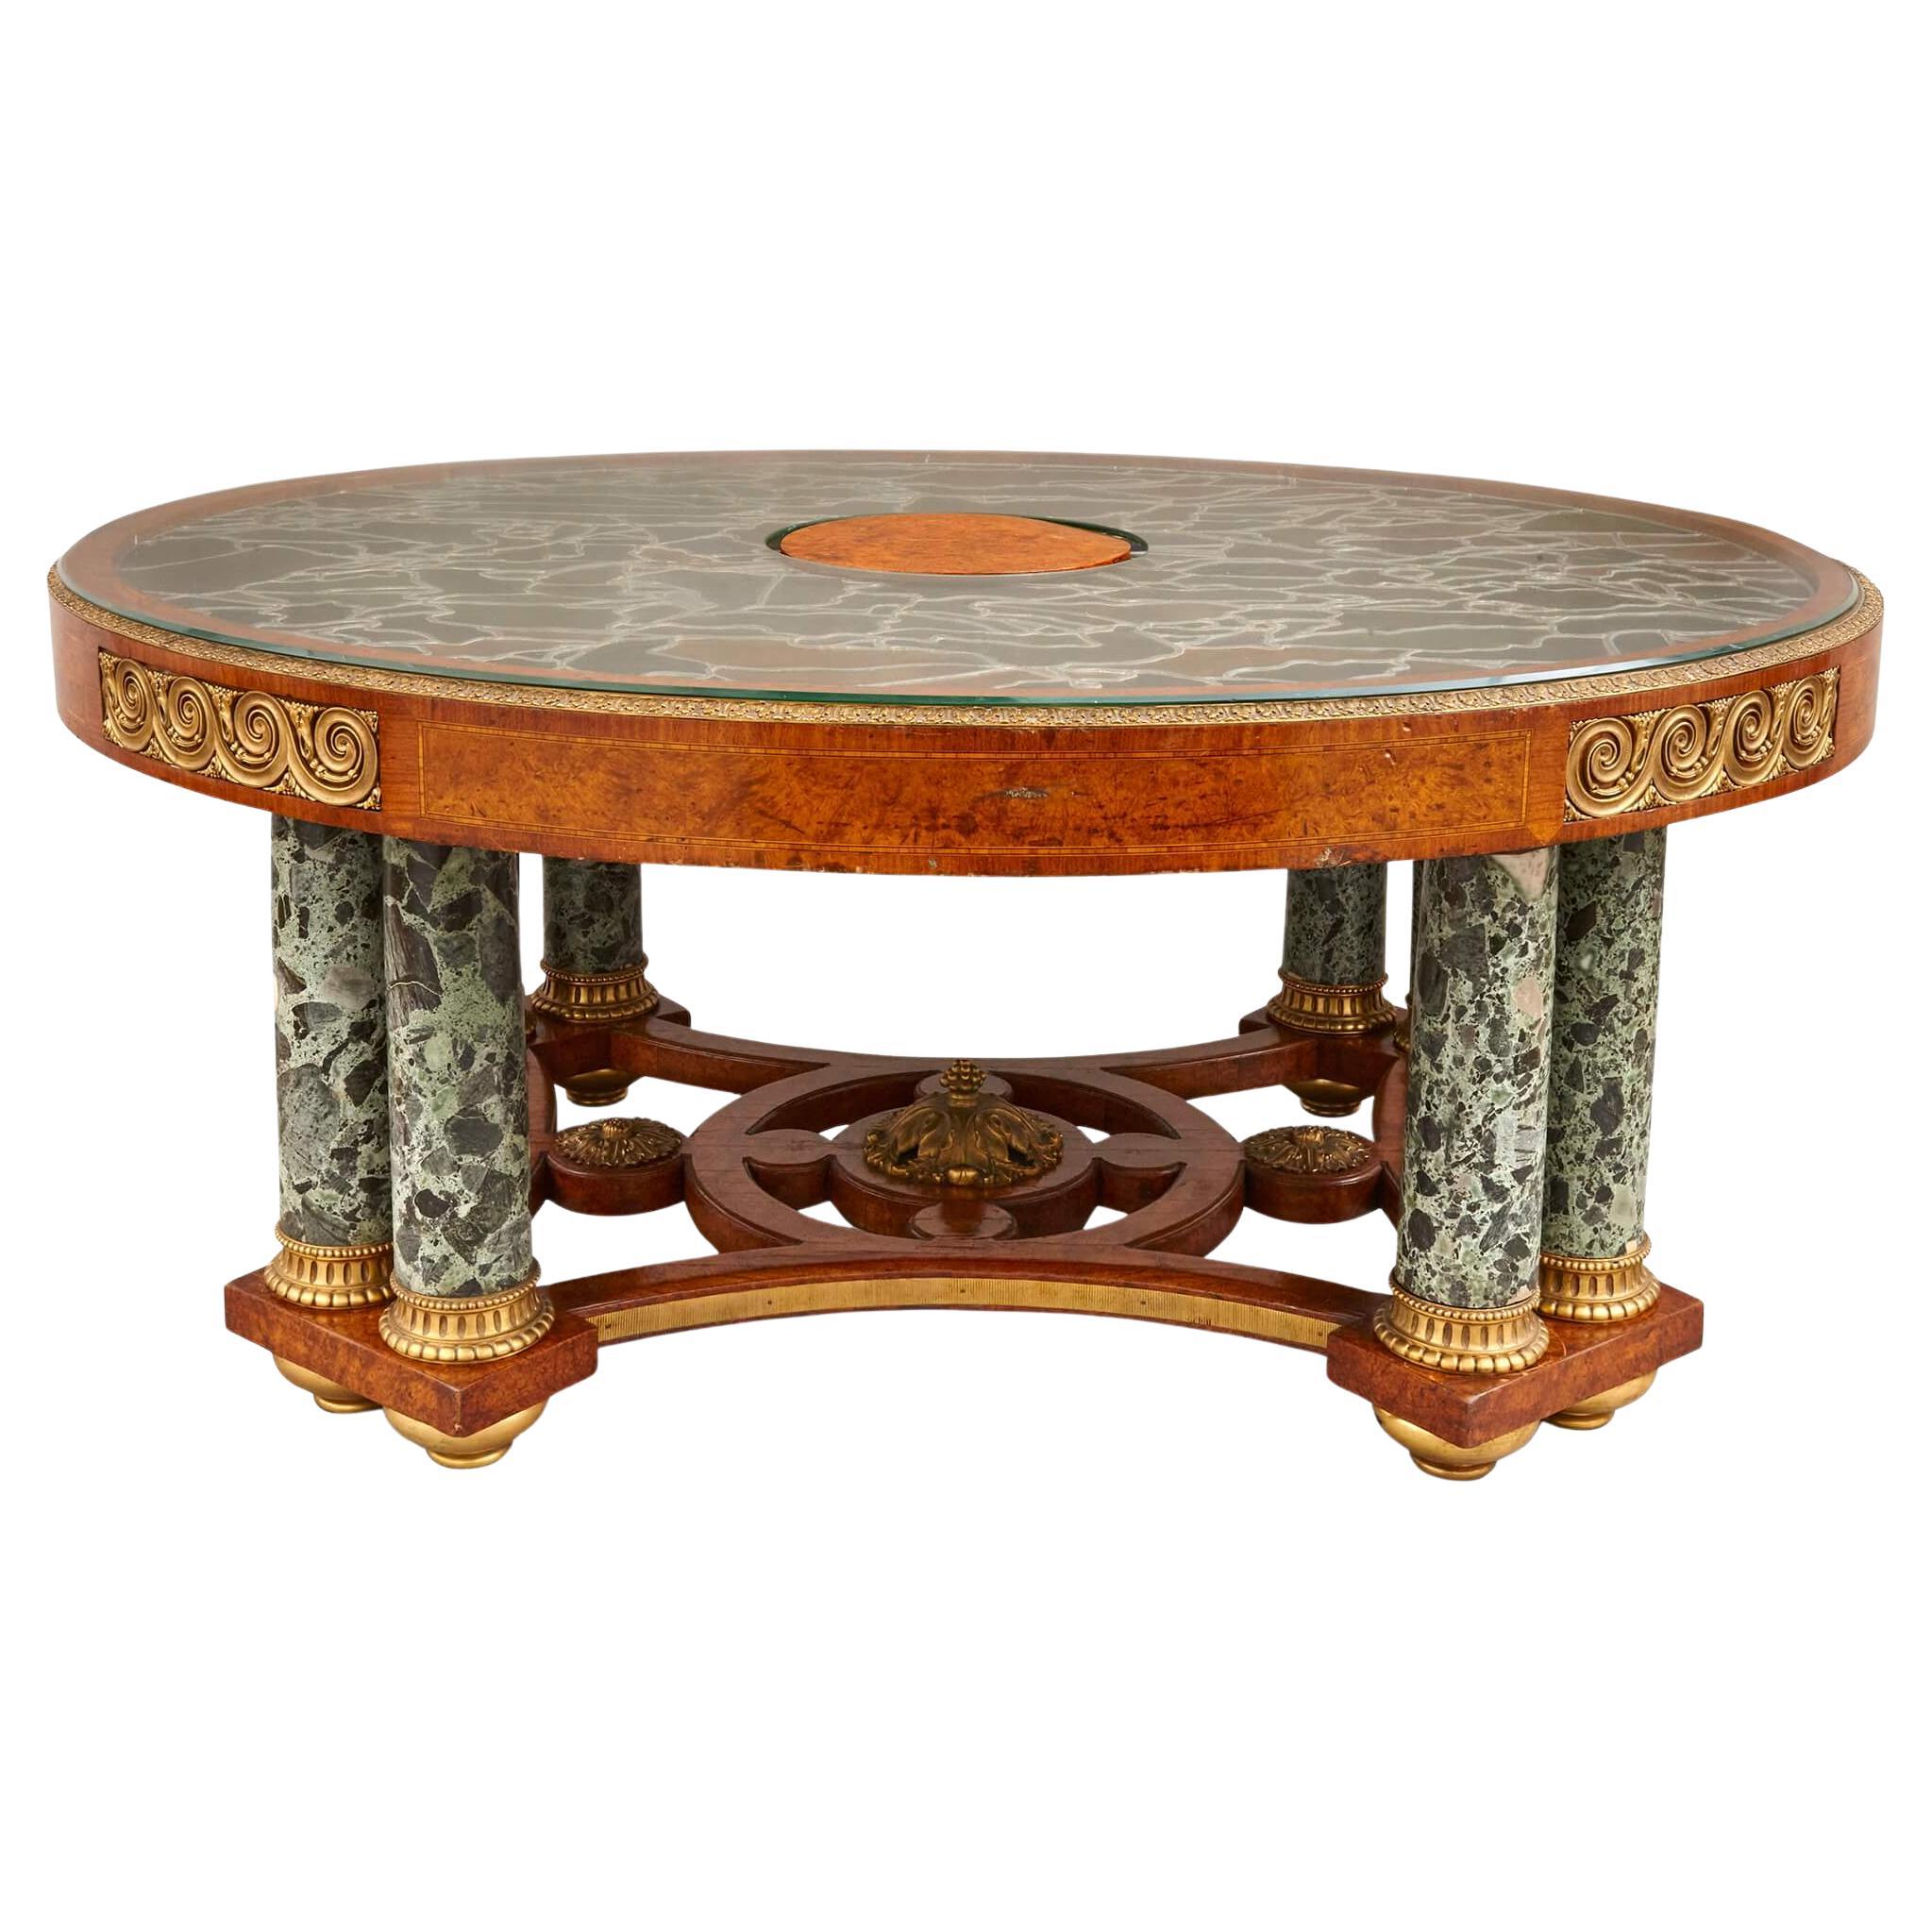 A large amboyna, stained glass, marble, and ormolu mounted centre table